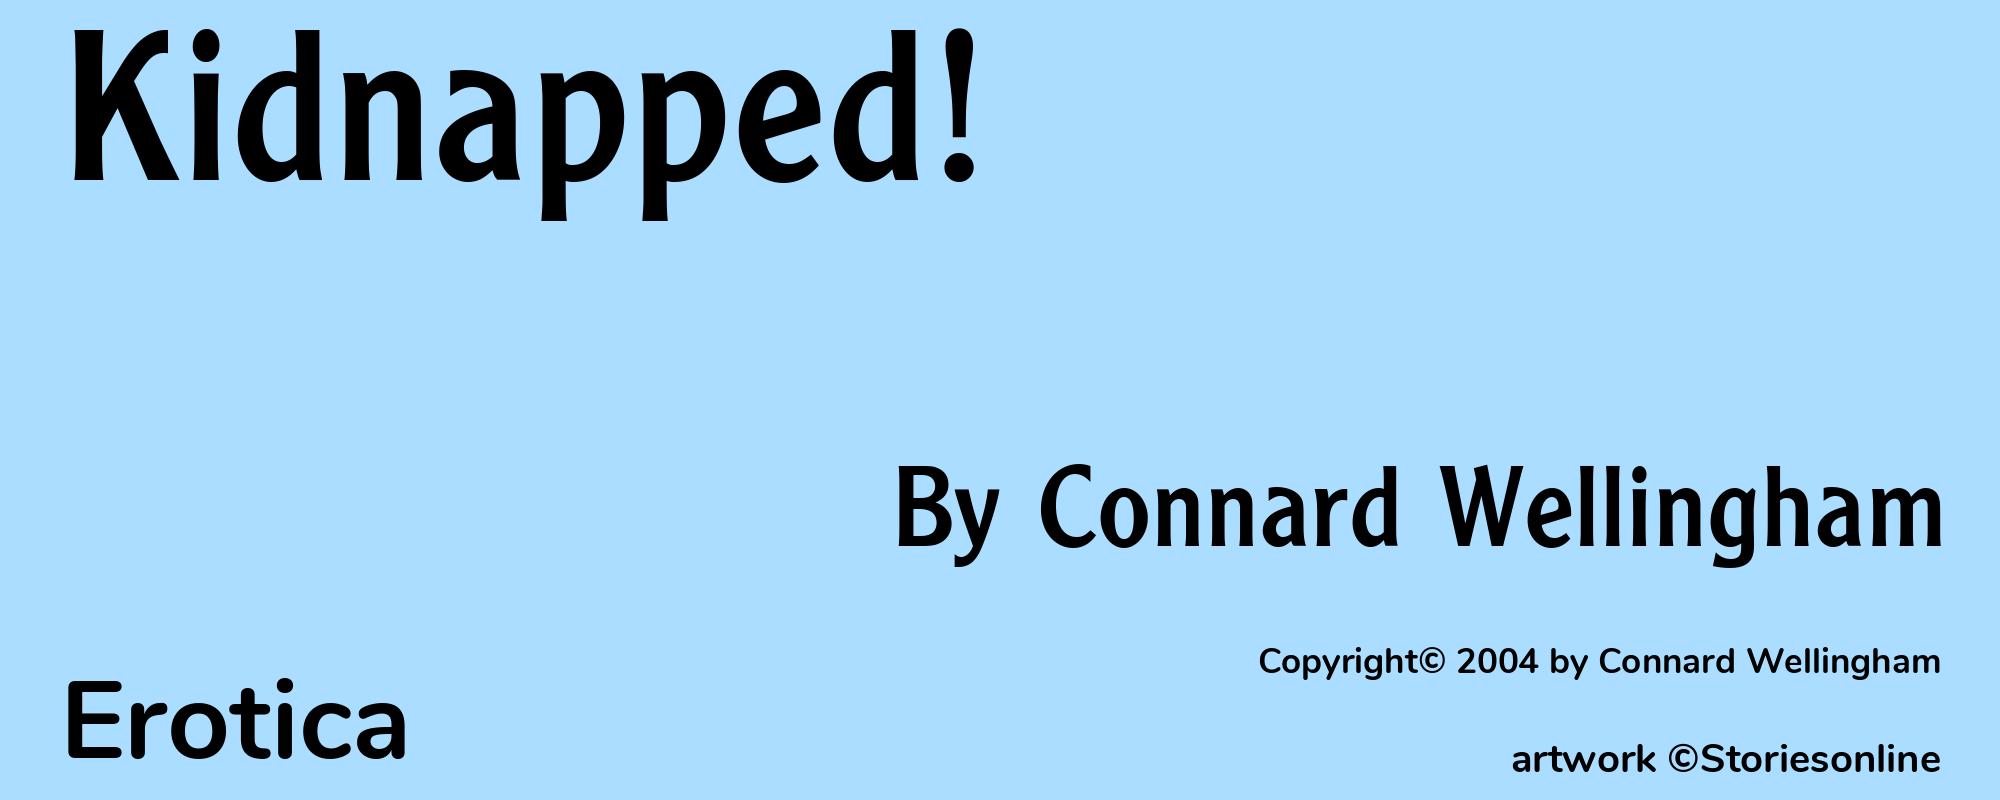 Kidnapped! - Cover